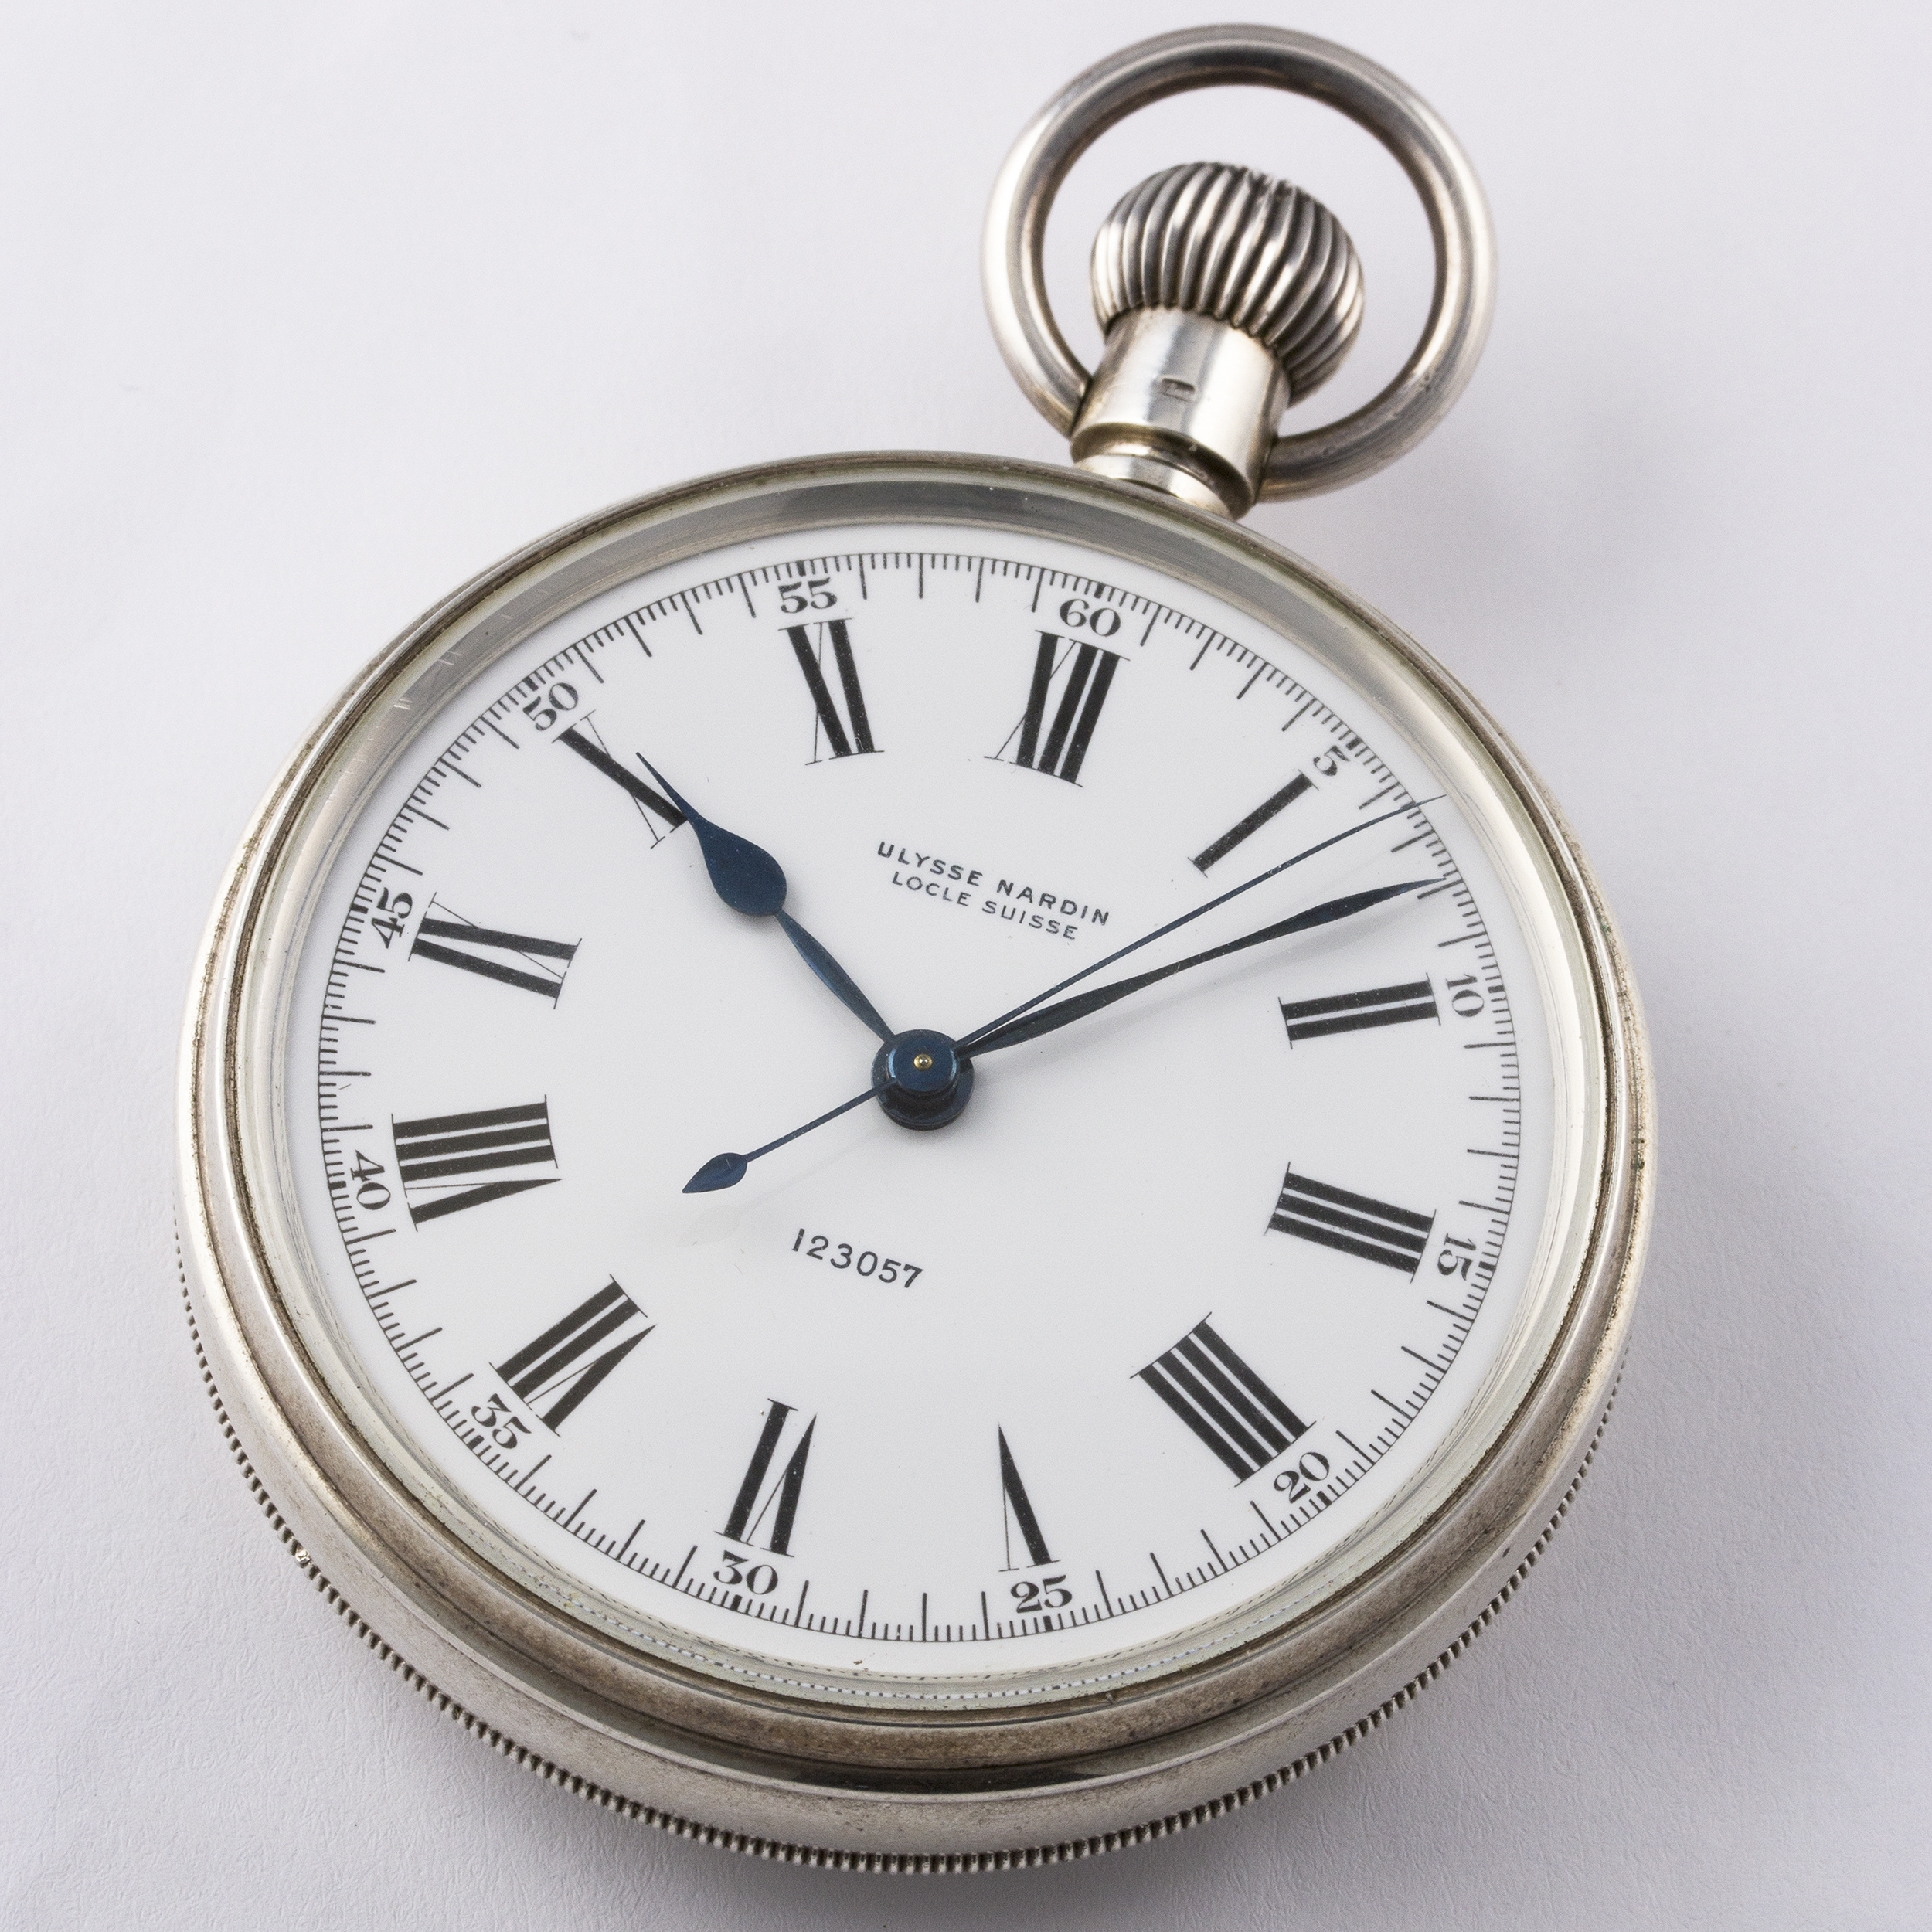 A RARE SOLID SILVER CASED BRITISH MILITARY ULYSSE NARDIN H.S.2 NAVY 
CHRONOMETER DECK WATCH CIRCA - Image 4 of 9